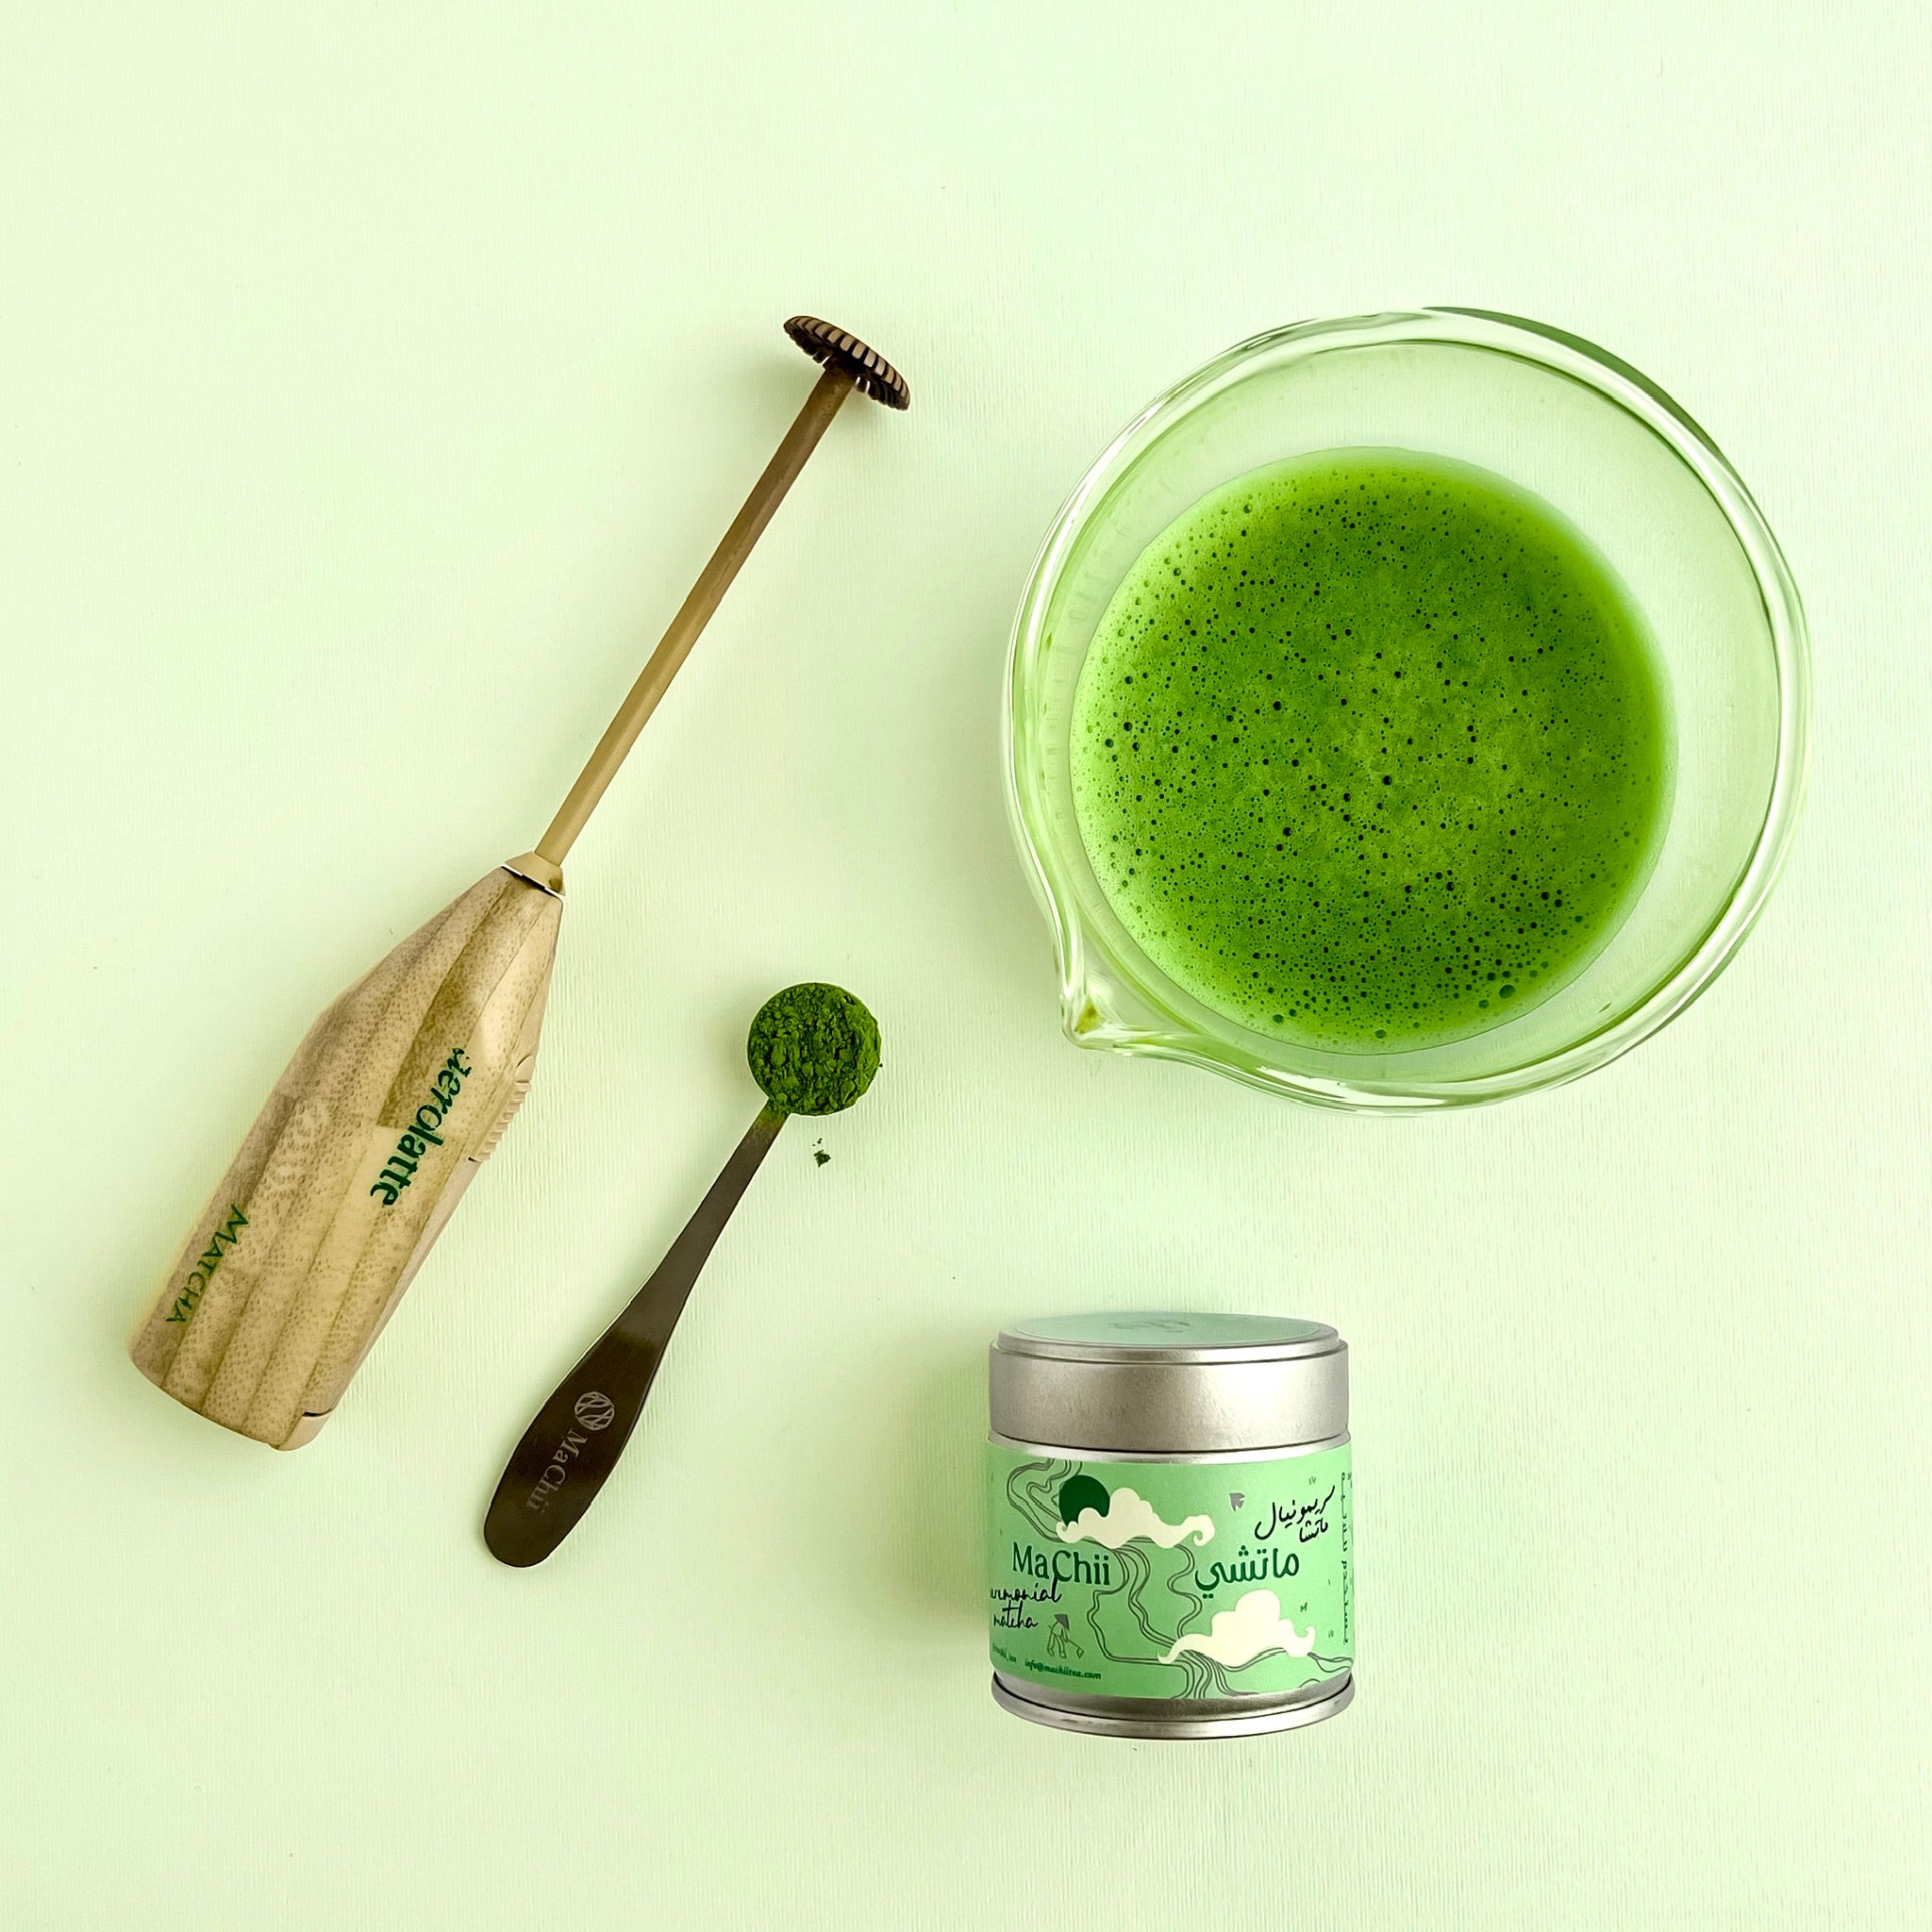 modern matcha latte bundle with an aerolatte electric matcha whisk, a silver matcha tin, a matcha tea spoon and a glass bowl with spout filled with green powder.